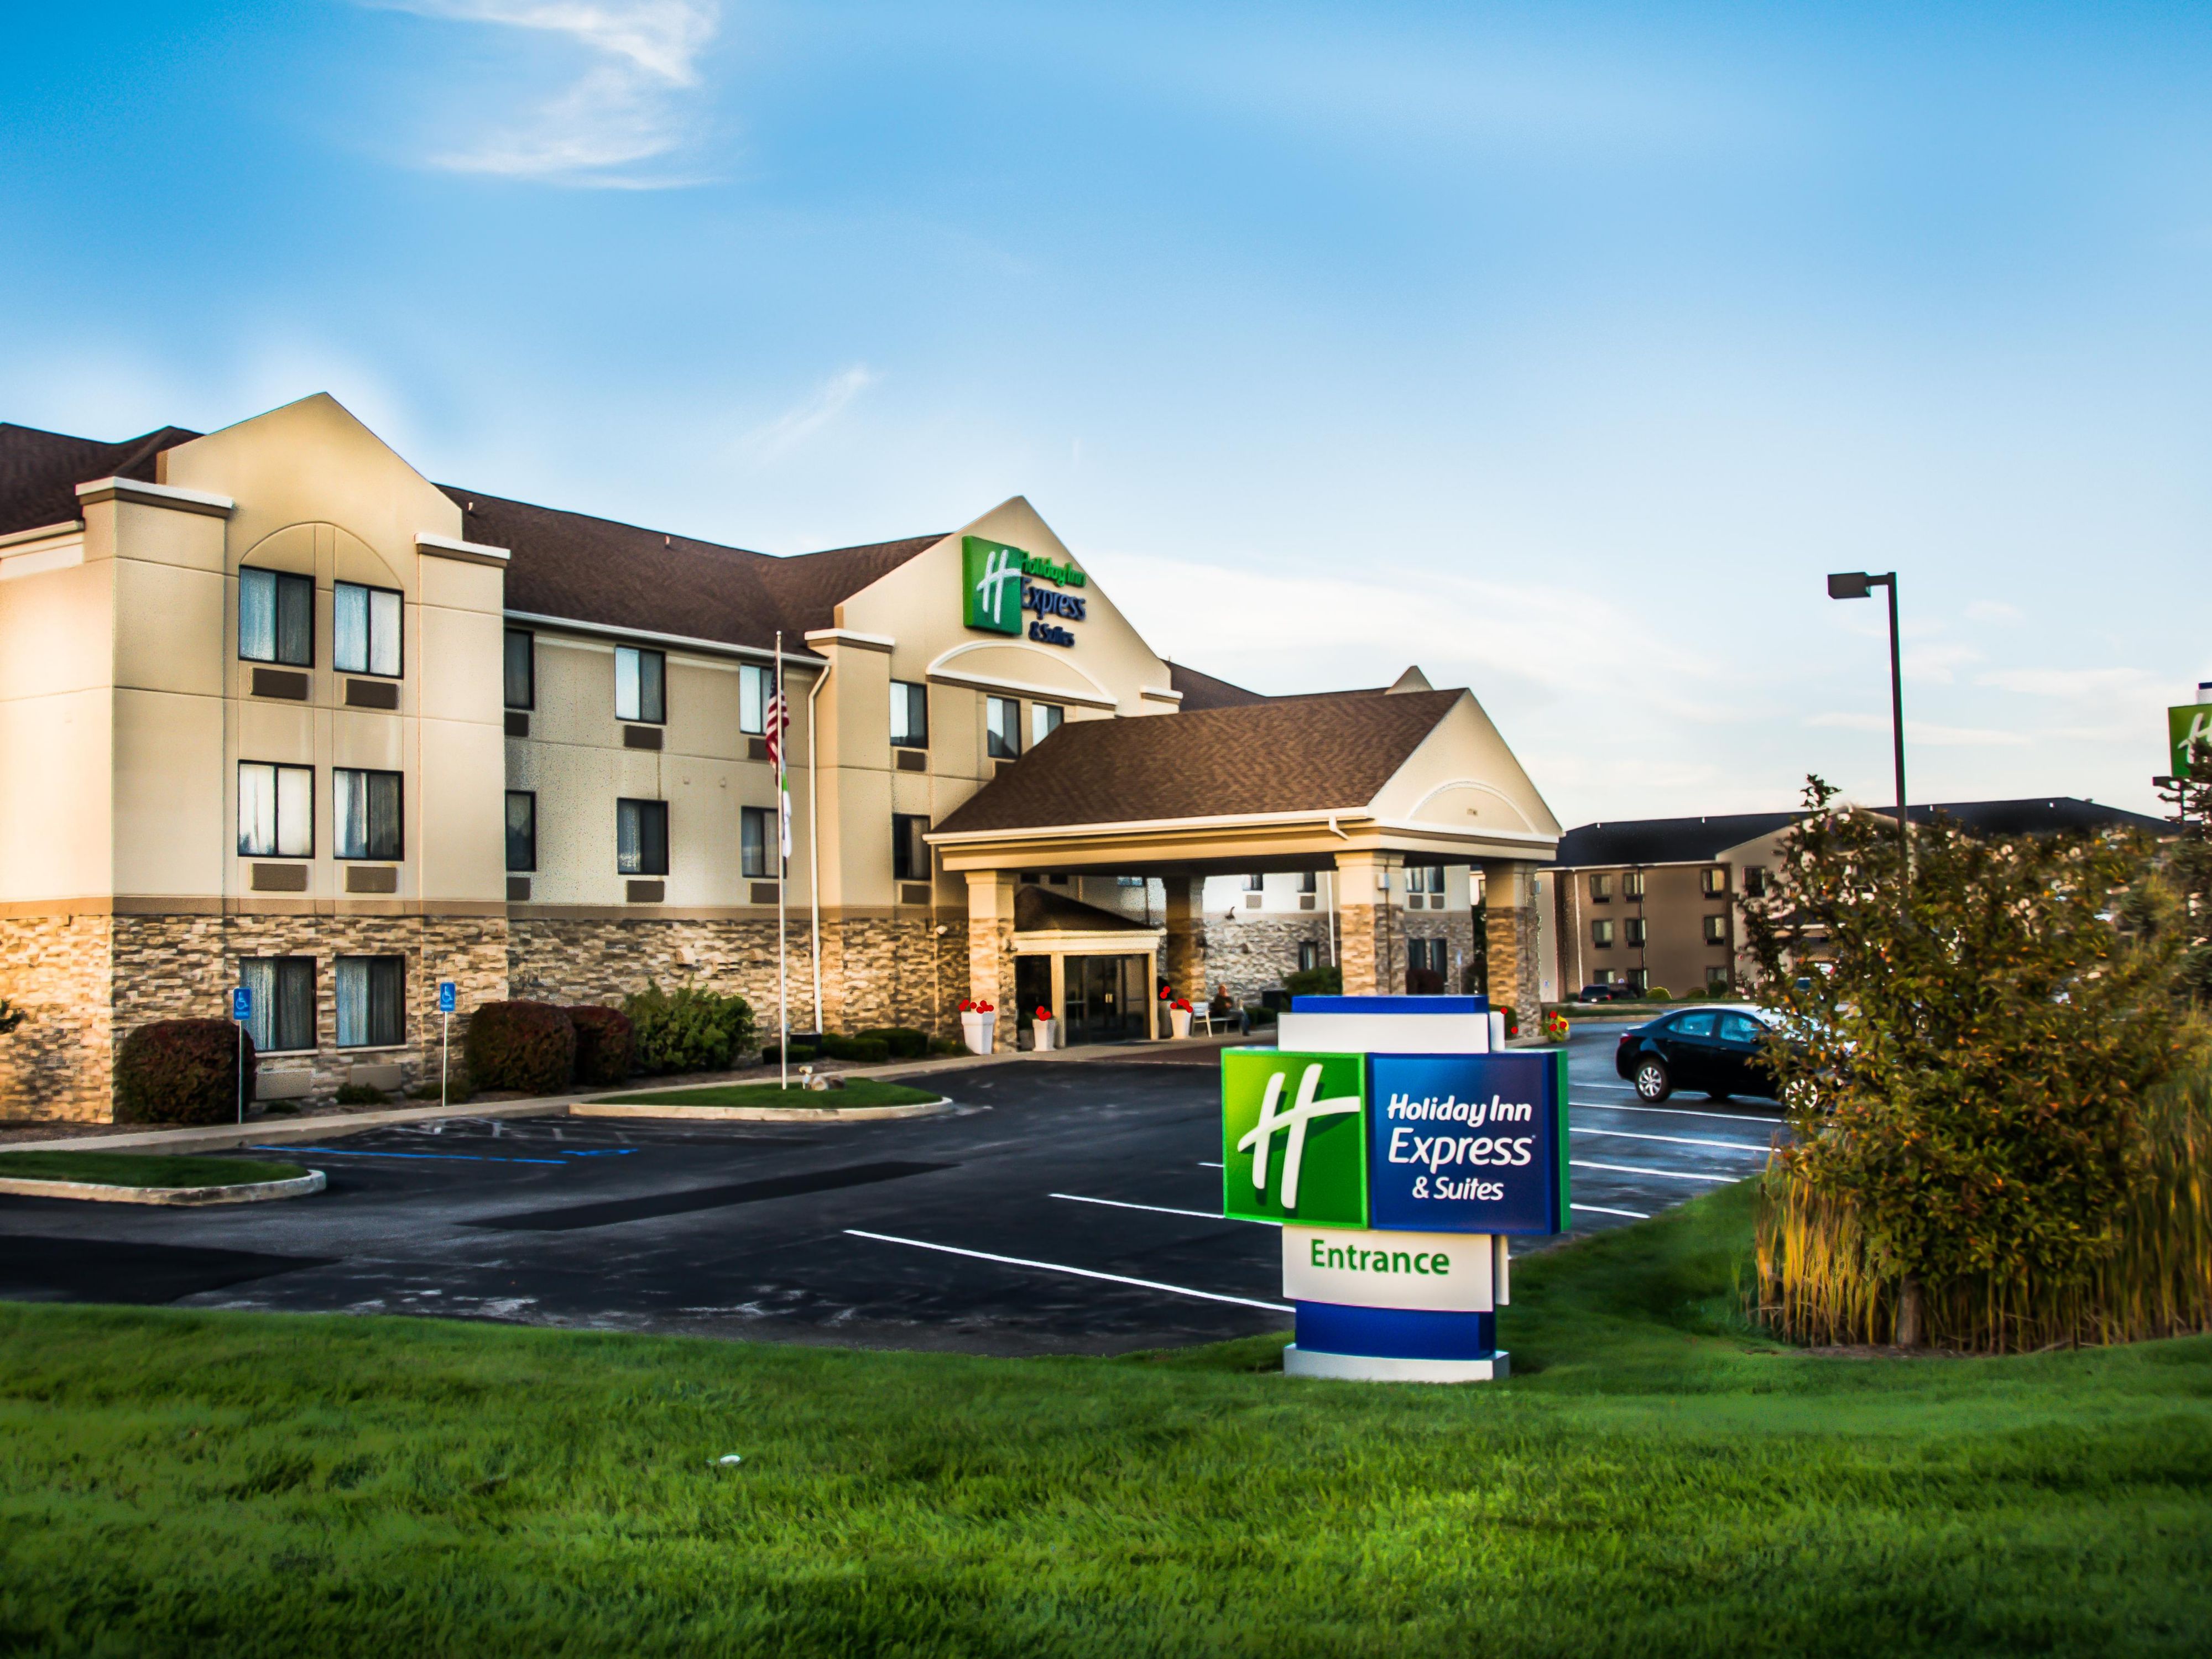 Budget Hotels In Holland Mi Holiday Inn Express Holland Price From Usd 137 75